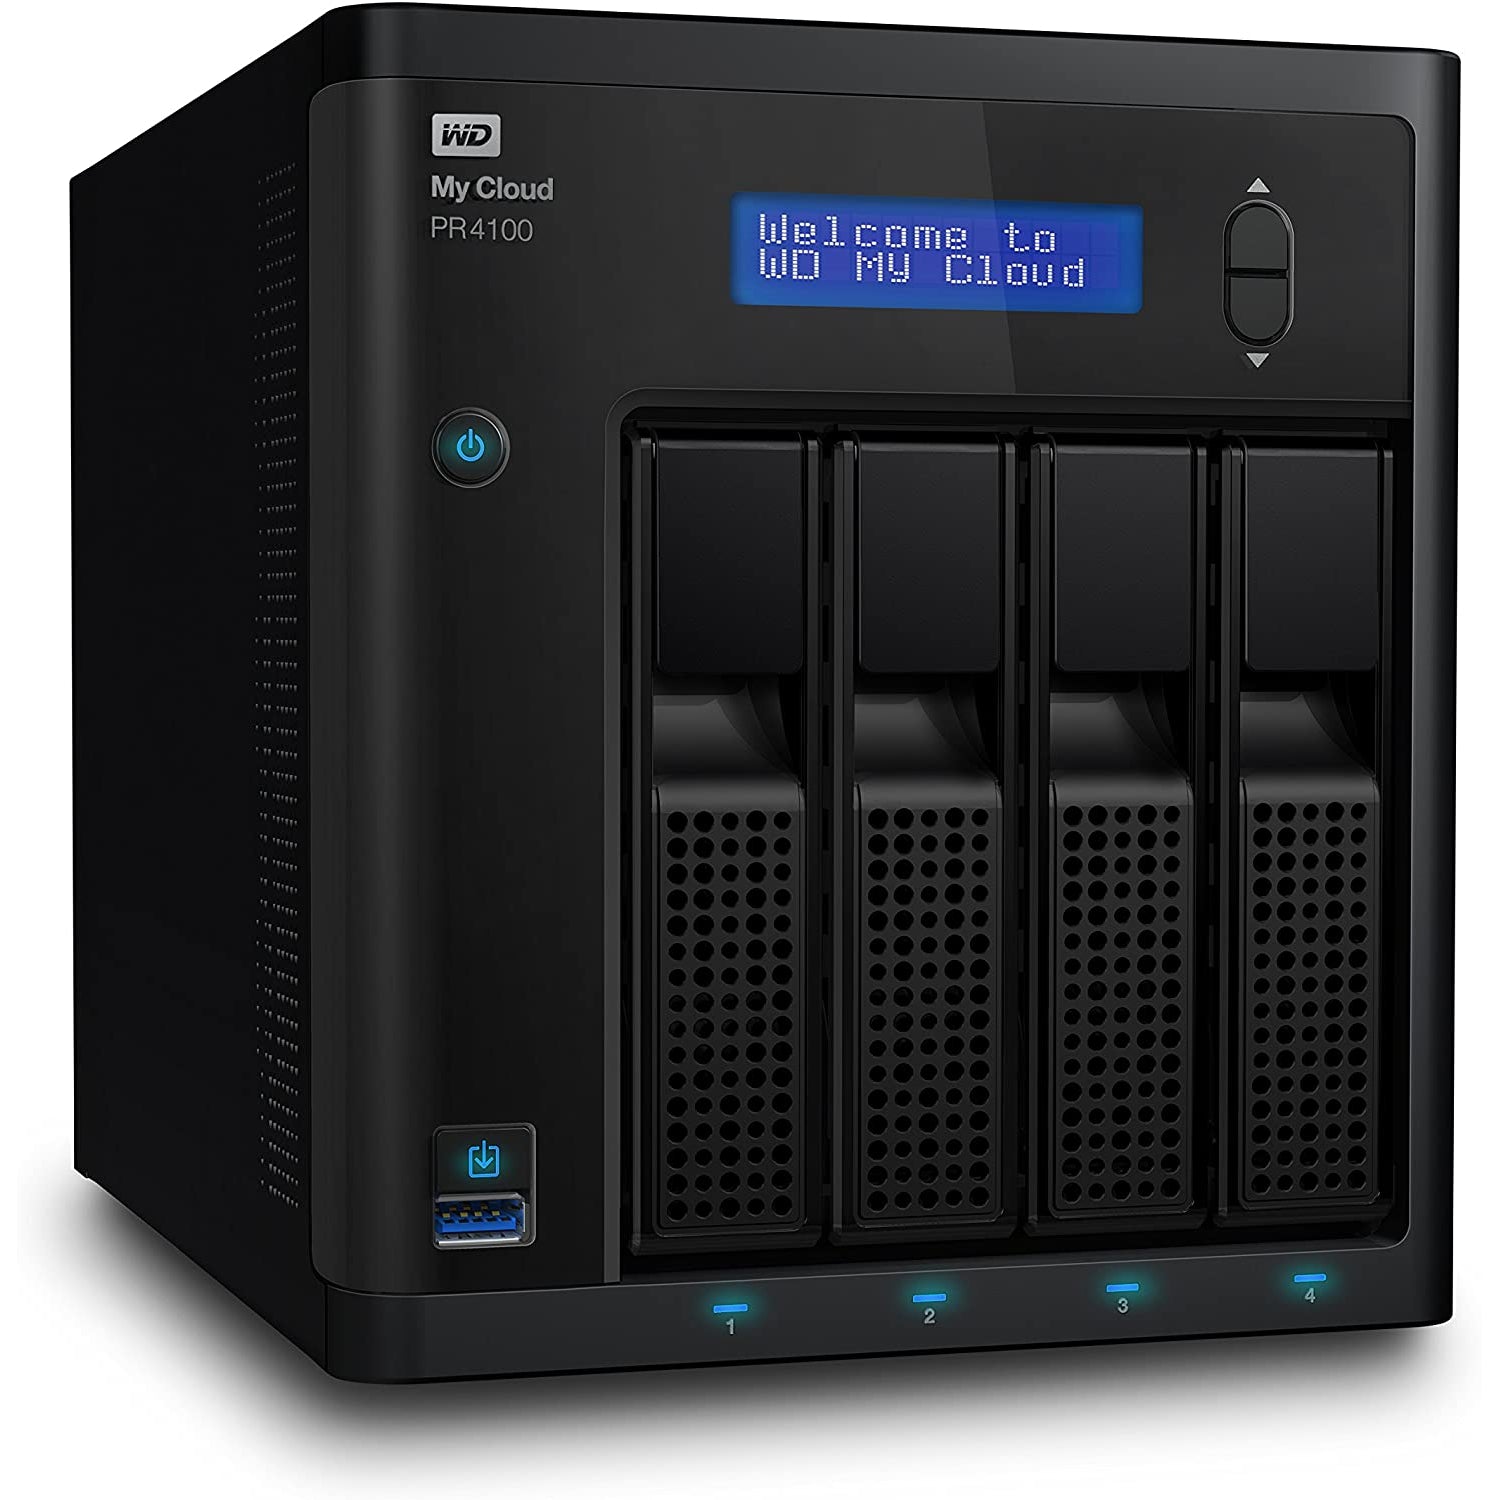 WD 56 TB My Cloud Pro PR4100 Professional Series 4-Bay Network Attached Storage